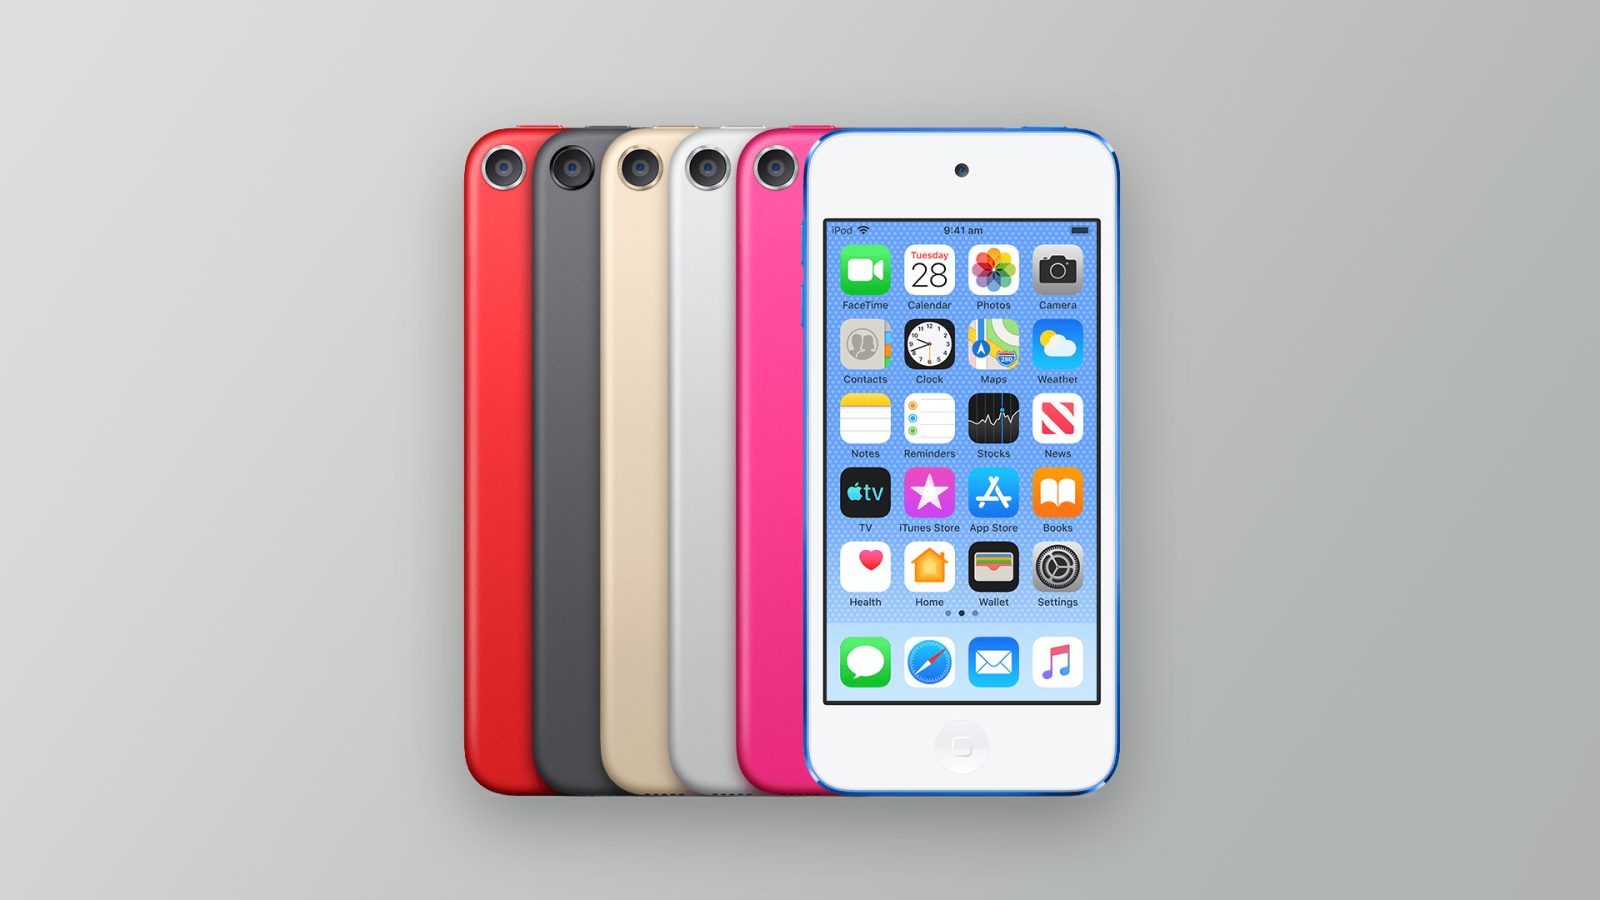 iPod touch now removed from Apple website - 9to5Mac